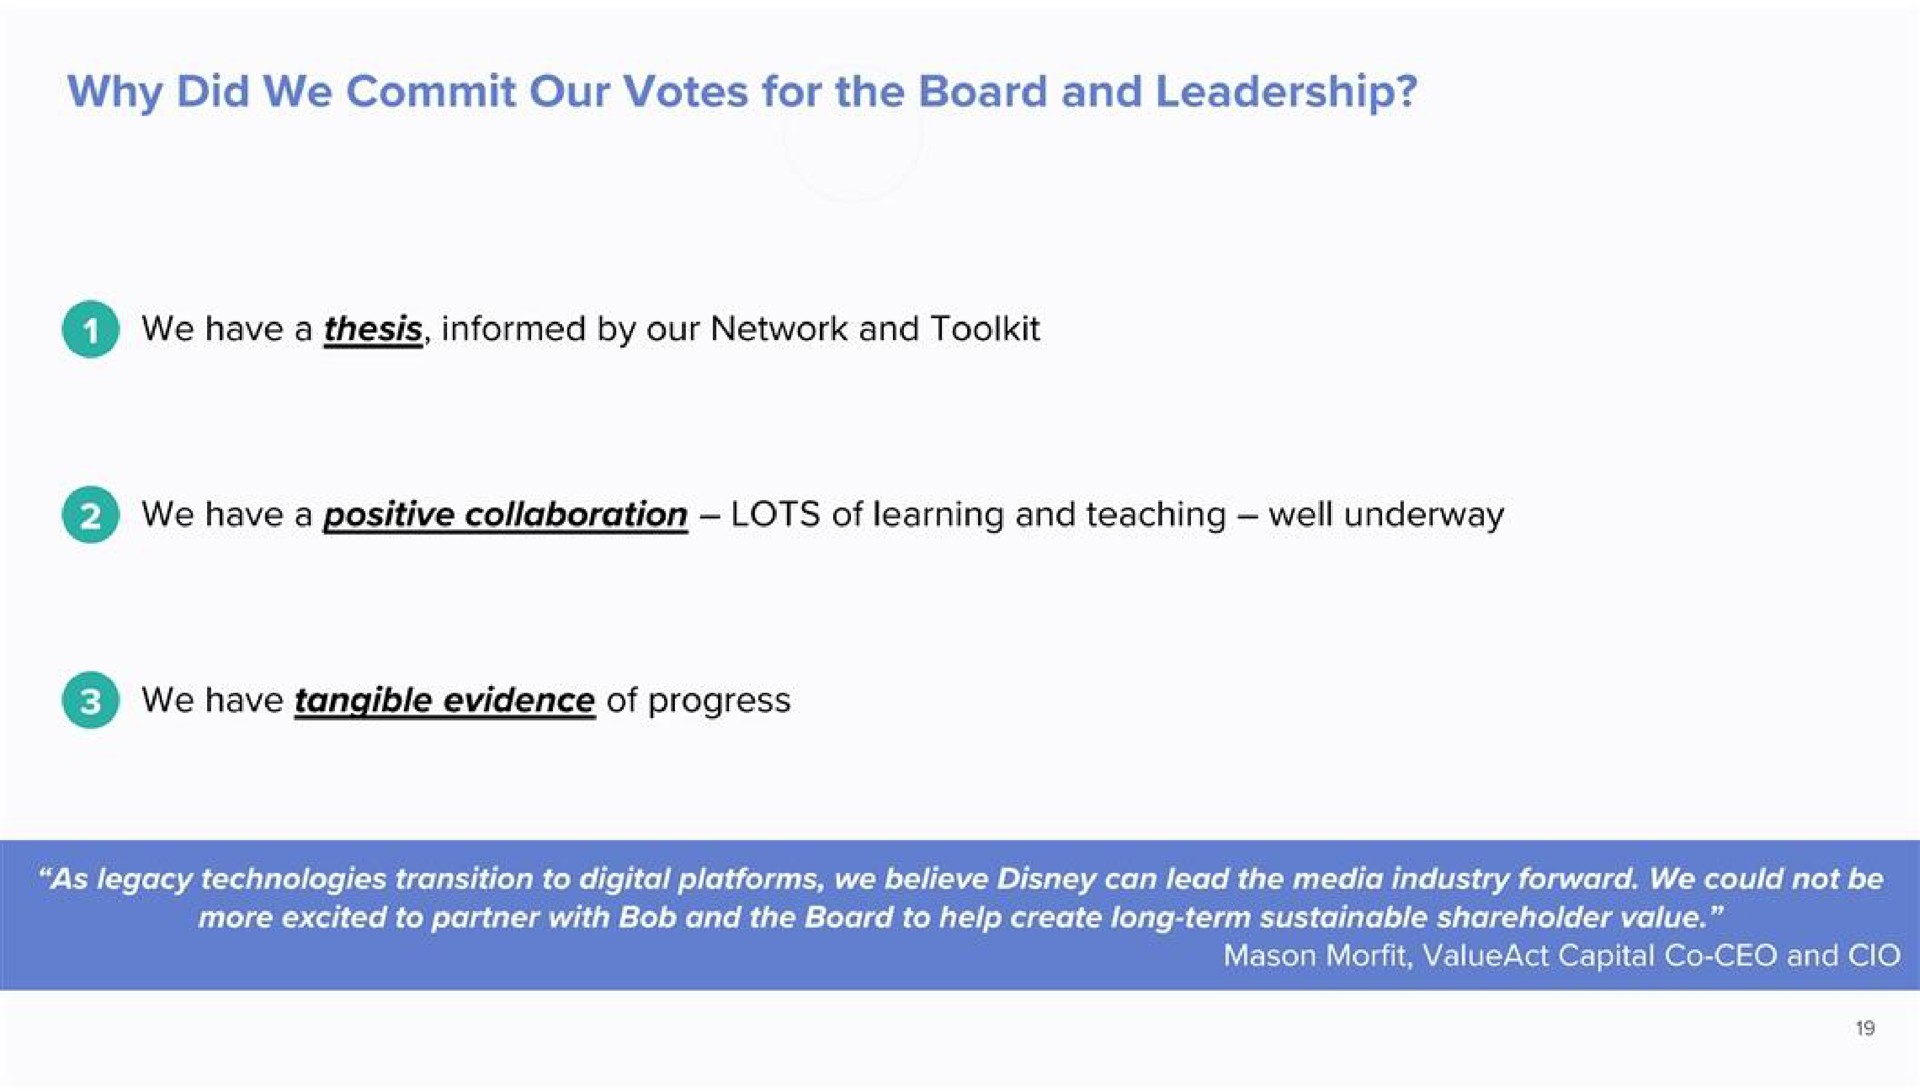 why did we commit our votes for the board and leadership | ValueAct Capital